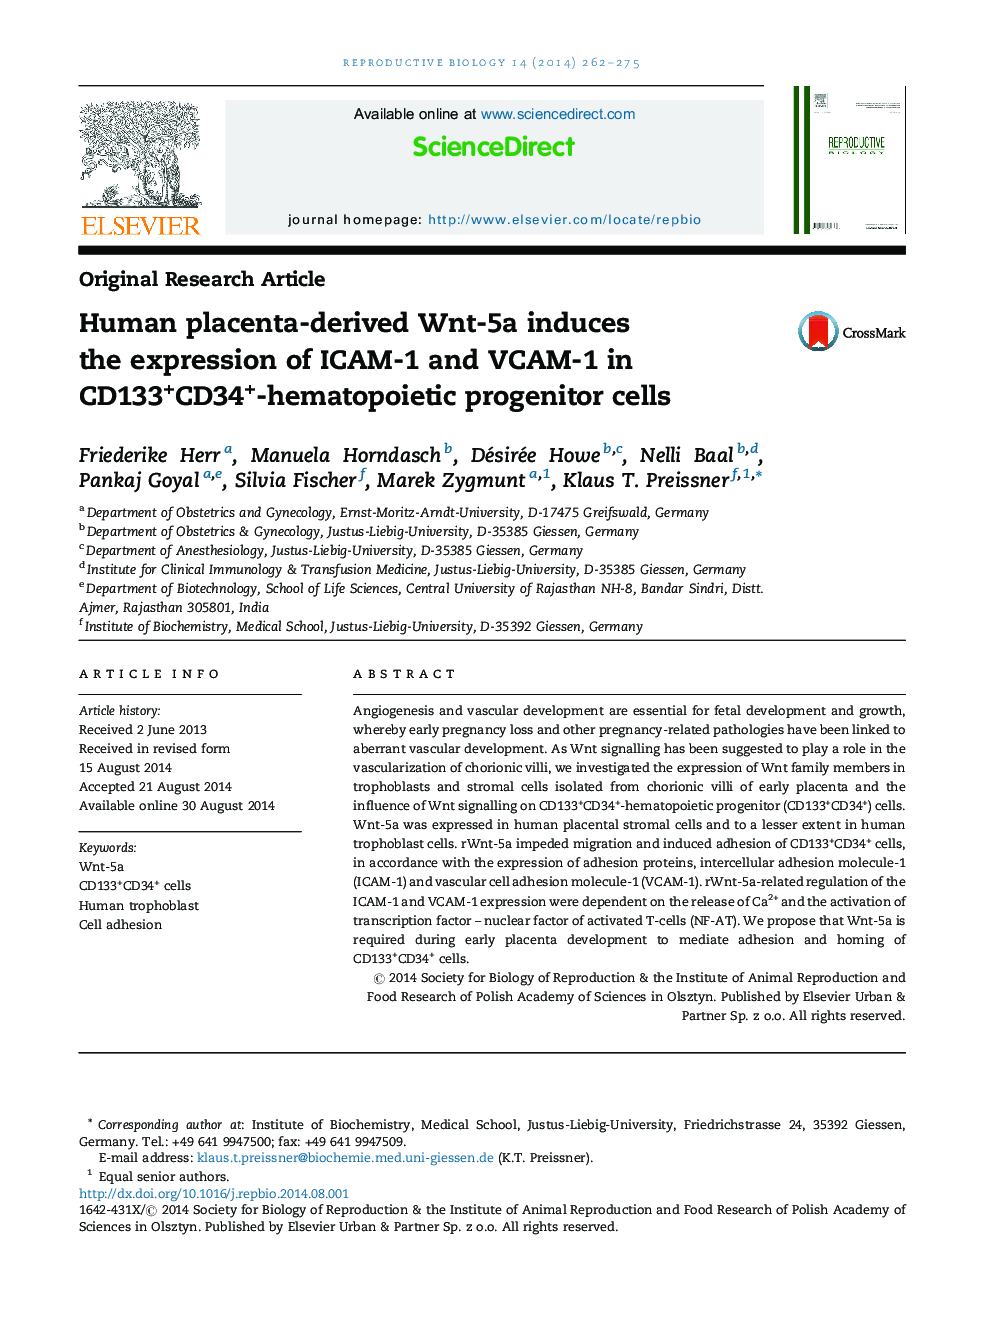 Human placenta-derived Wnt-5a induces the expression of ICAM-1 and VCAM-1 in CD133+CD34+-hematopoietic progenitor cells